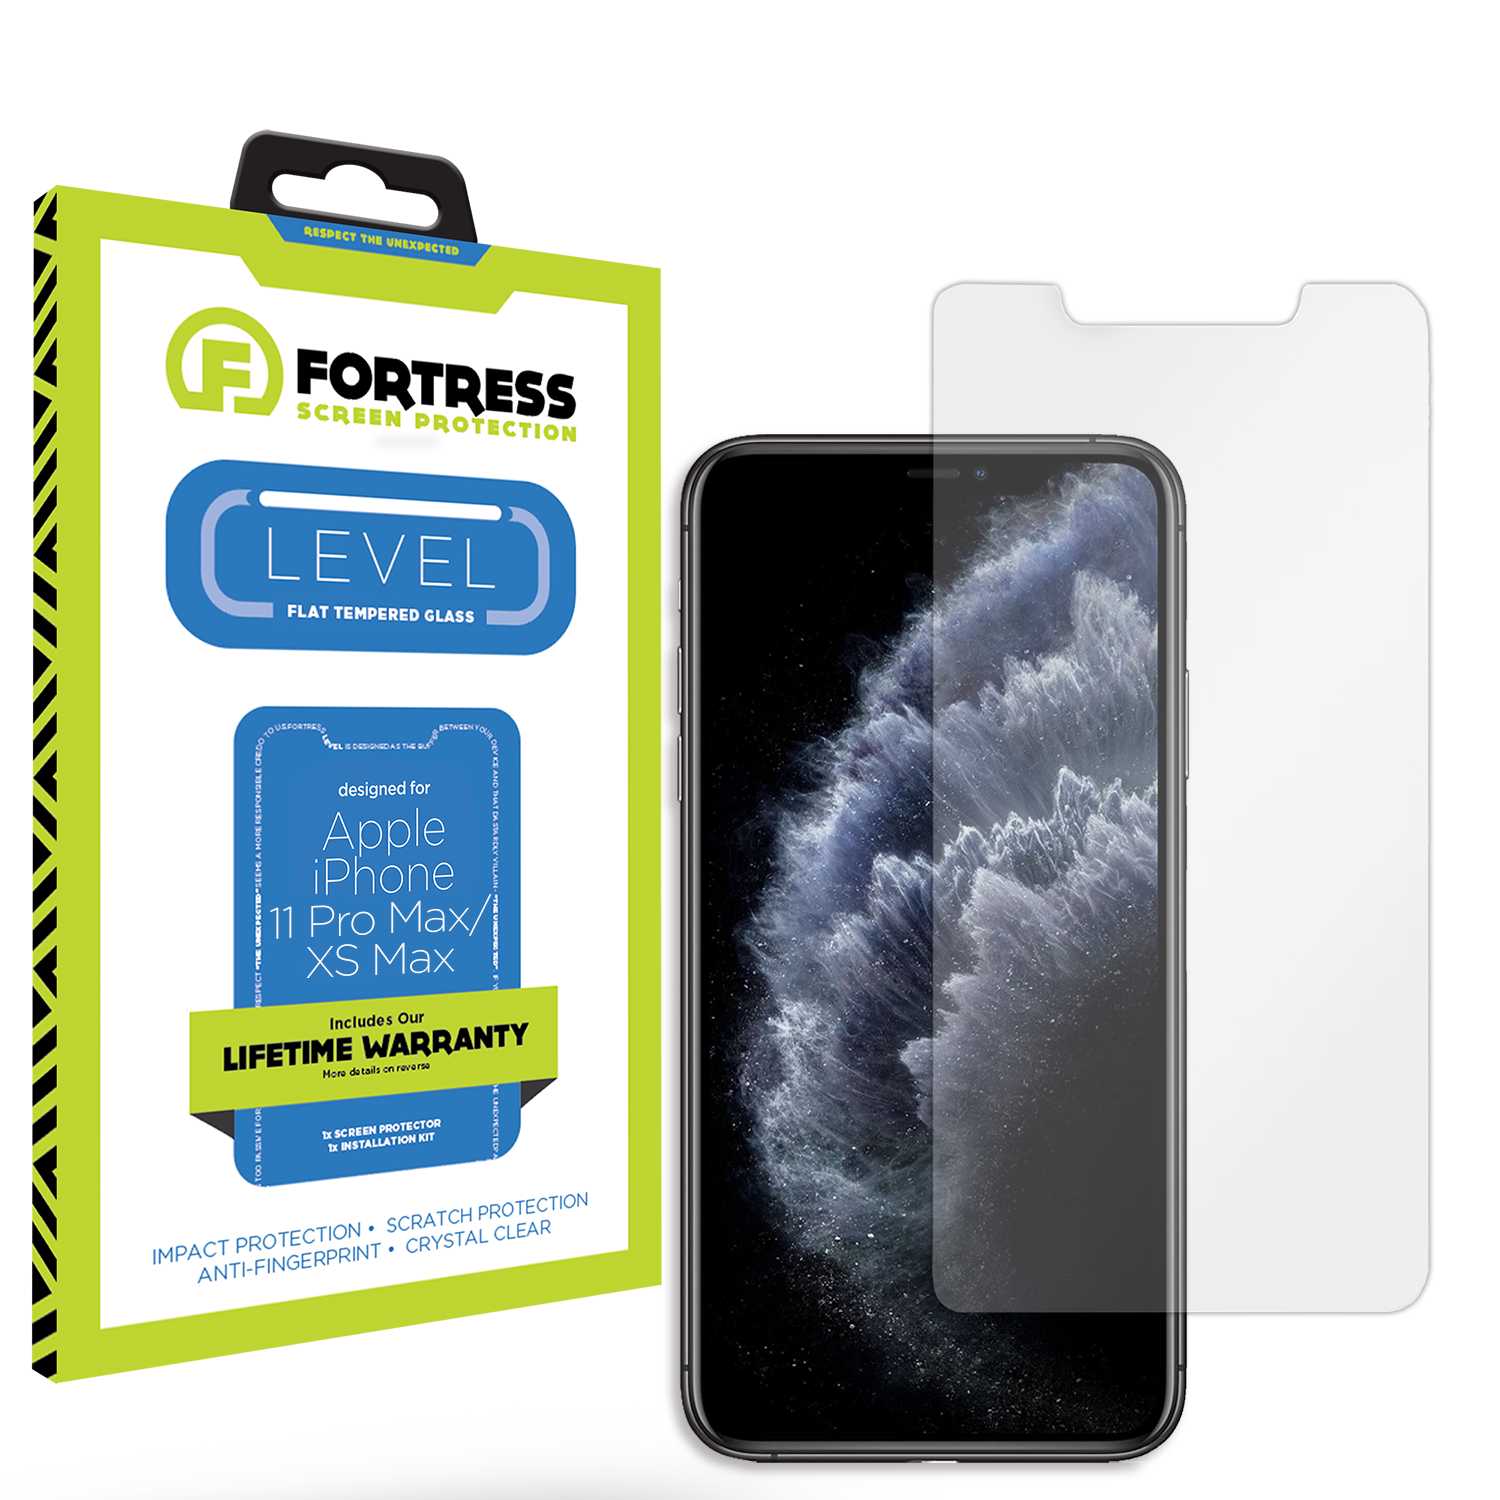 Fortress iPhone XS Max Screen Protector $0Coverage Scooch Screen Protector